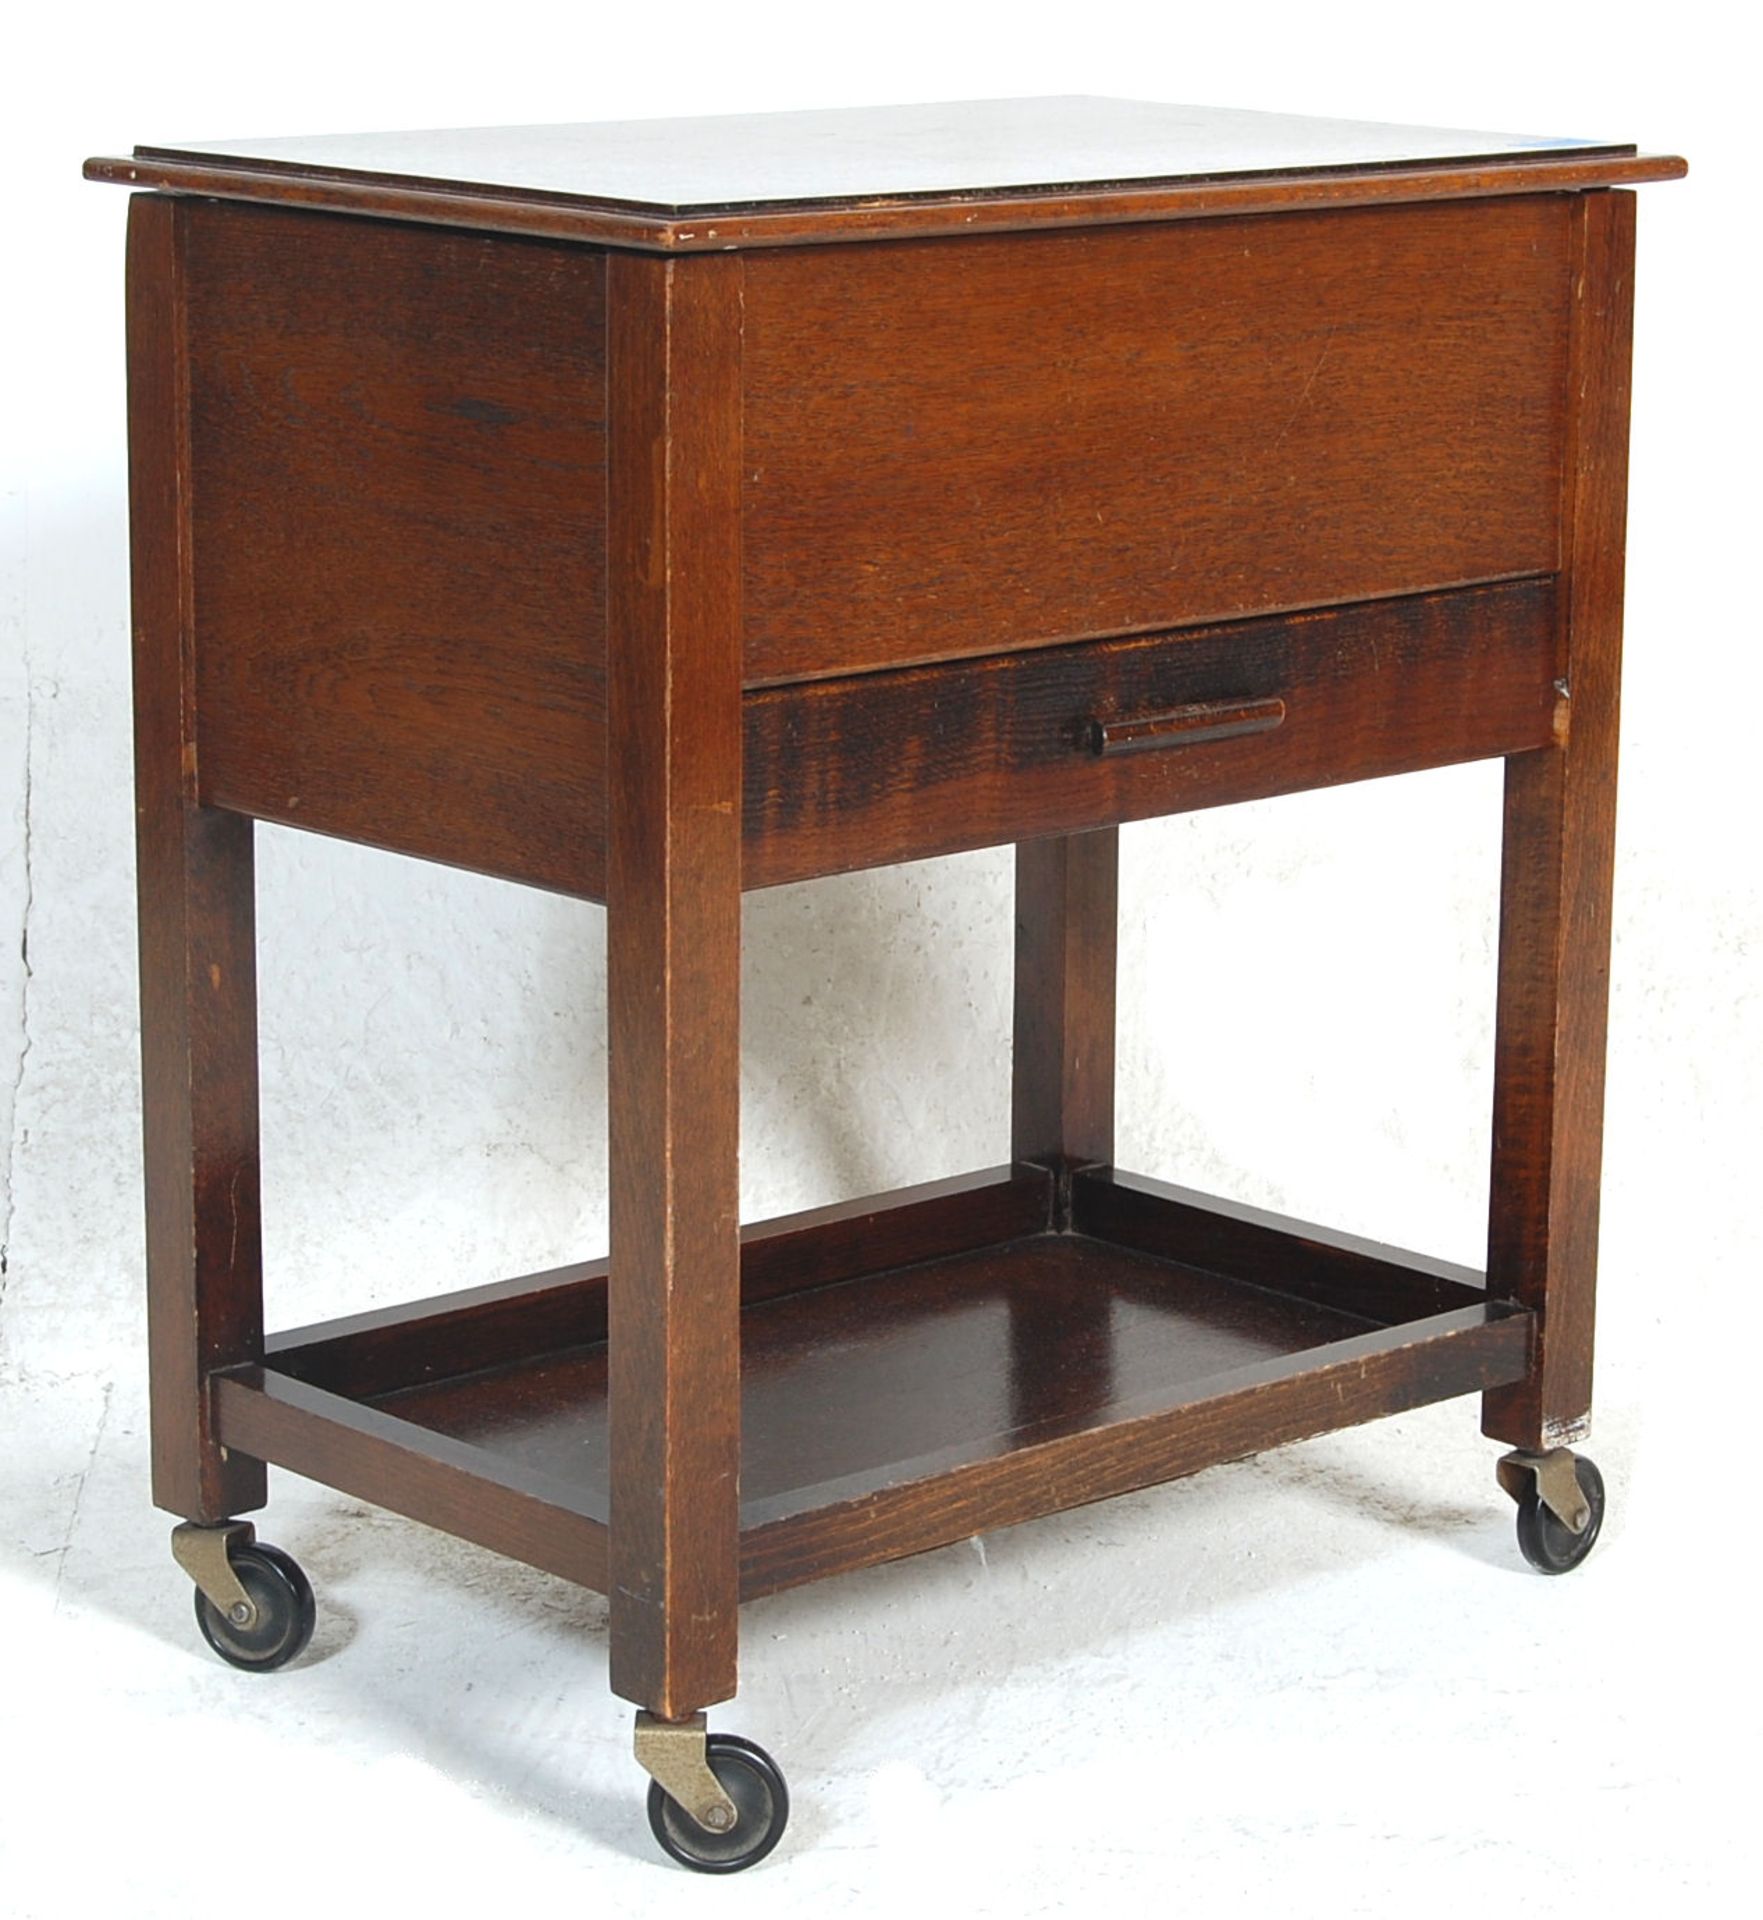 A 1920’s antique oak sewing box with hinged top and inlaid interior over a single drawer with soft